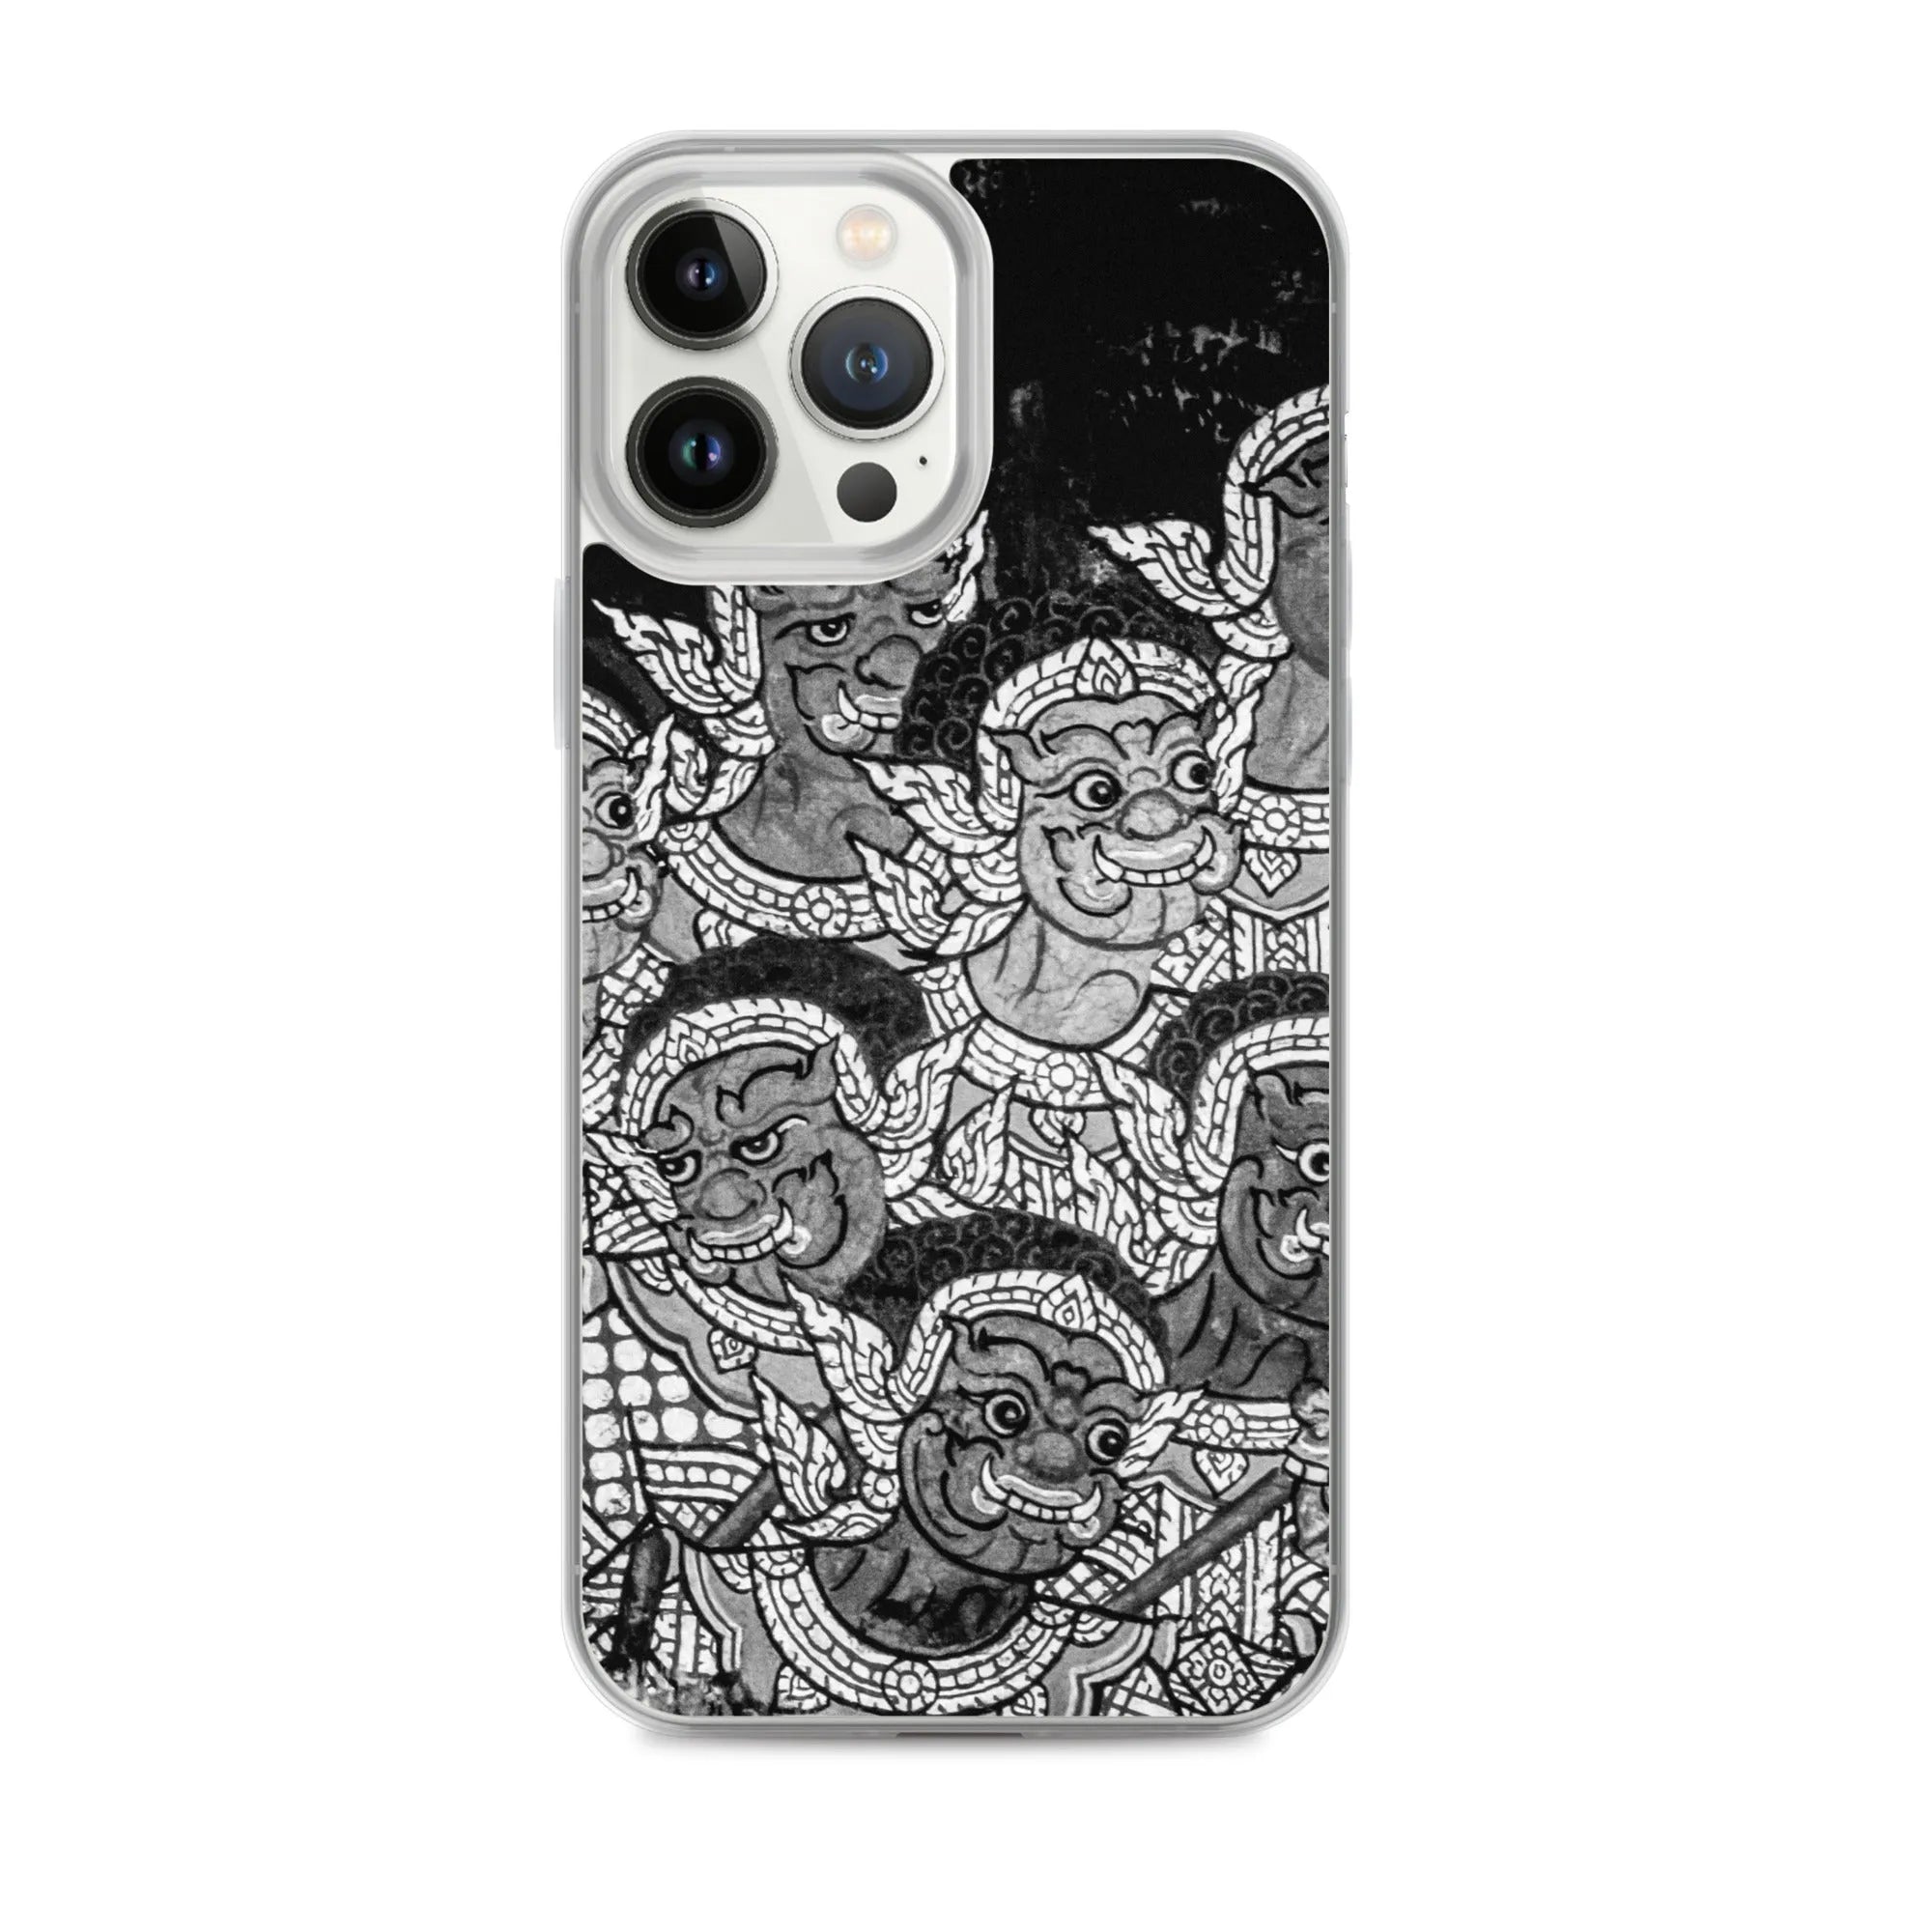 Babes In The Woods - Designer Travels Art Iphone Case - black And White - Iphone 13 Pro Max - Mobile Phone Cases